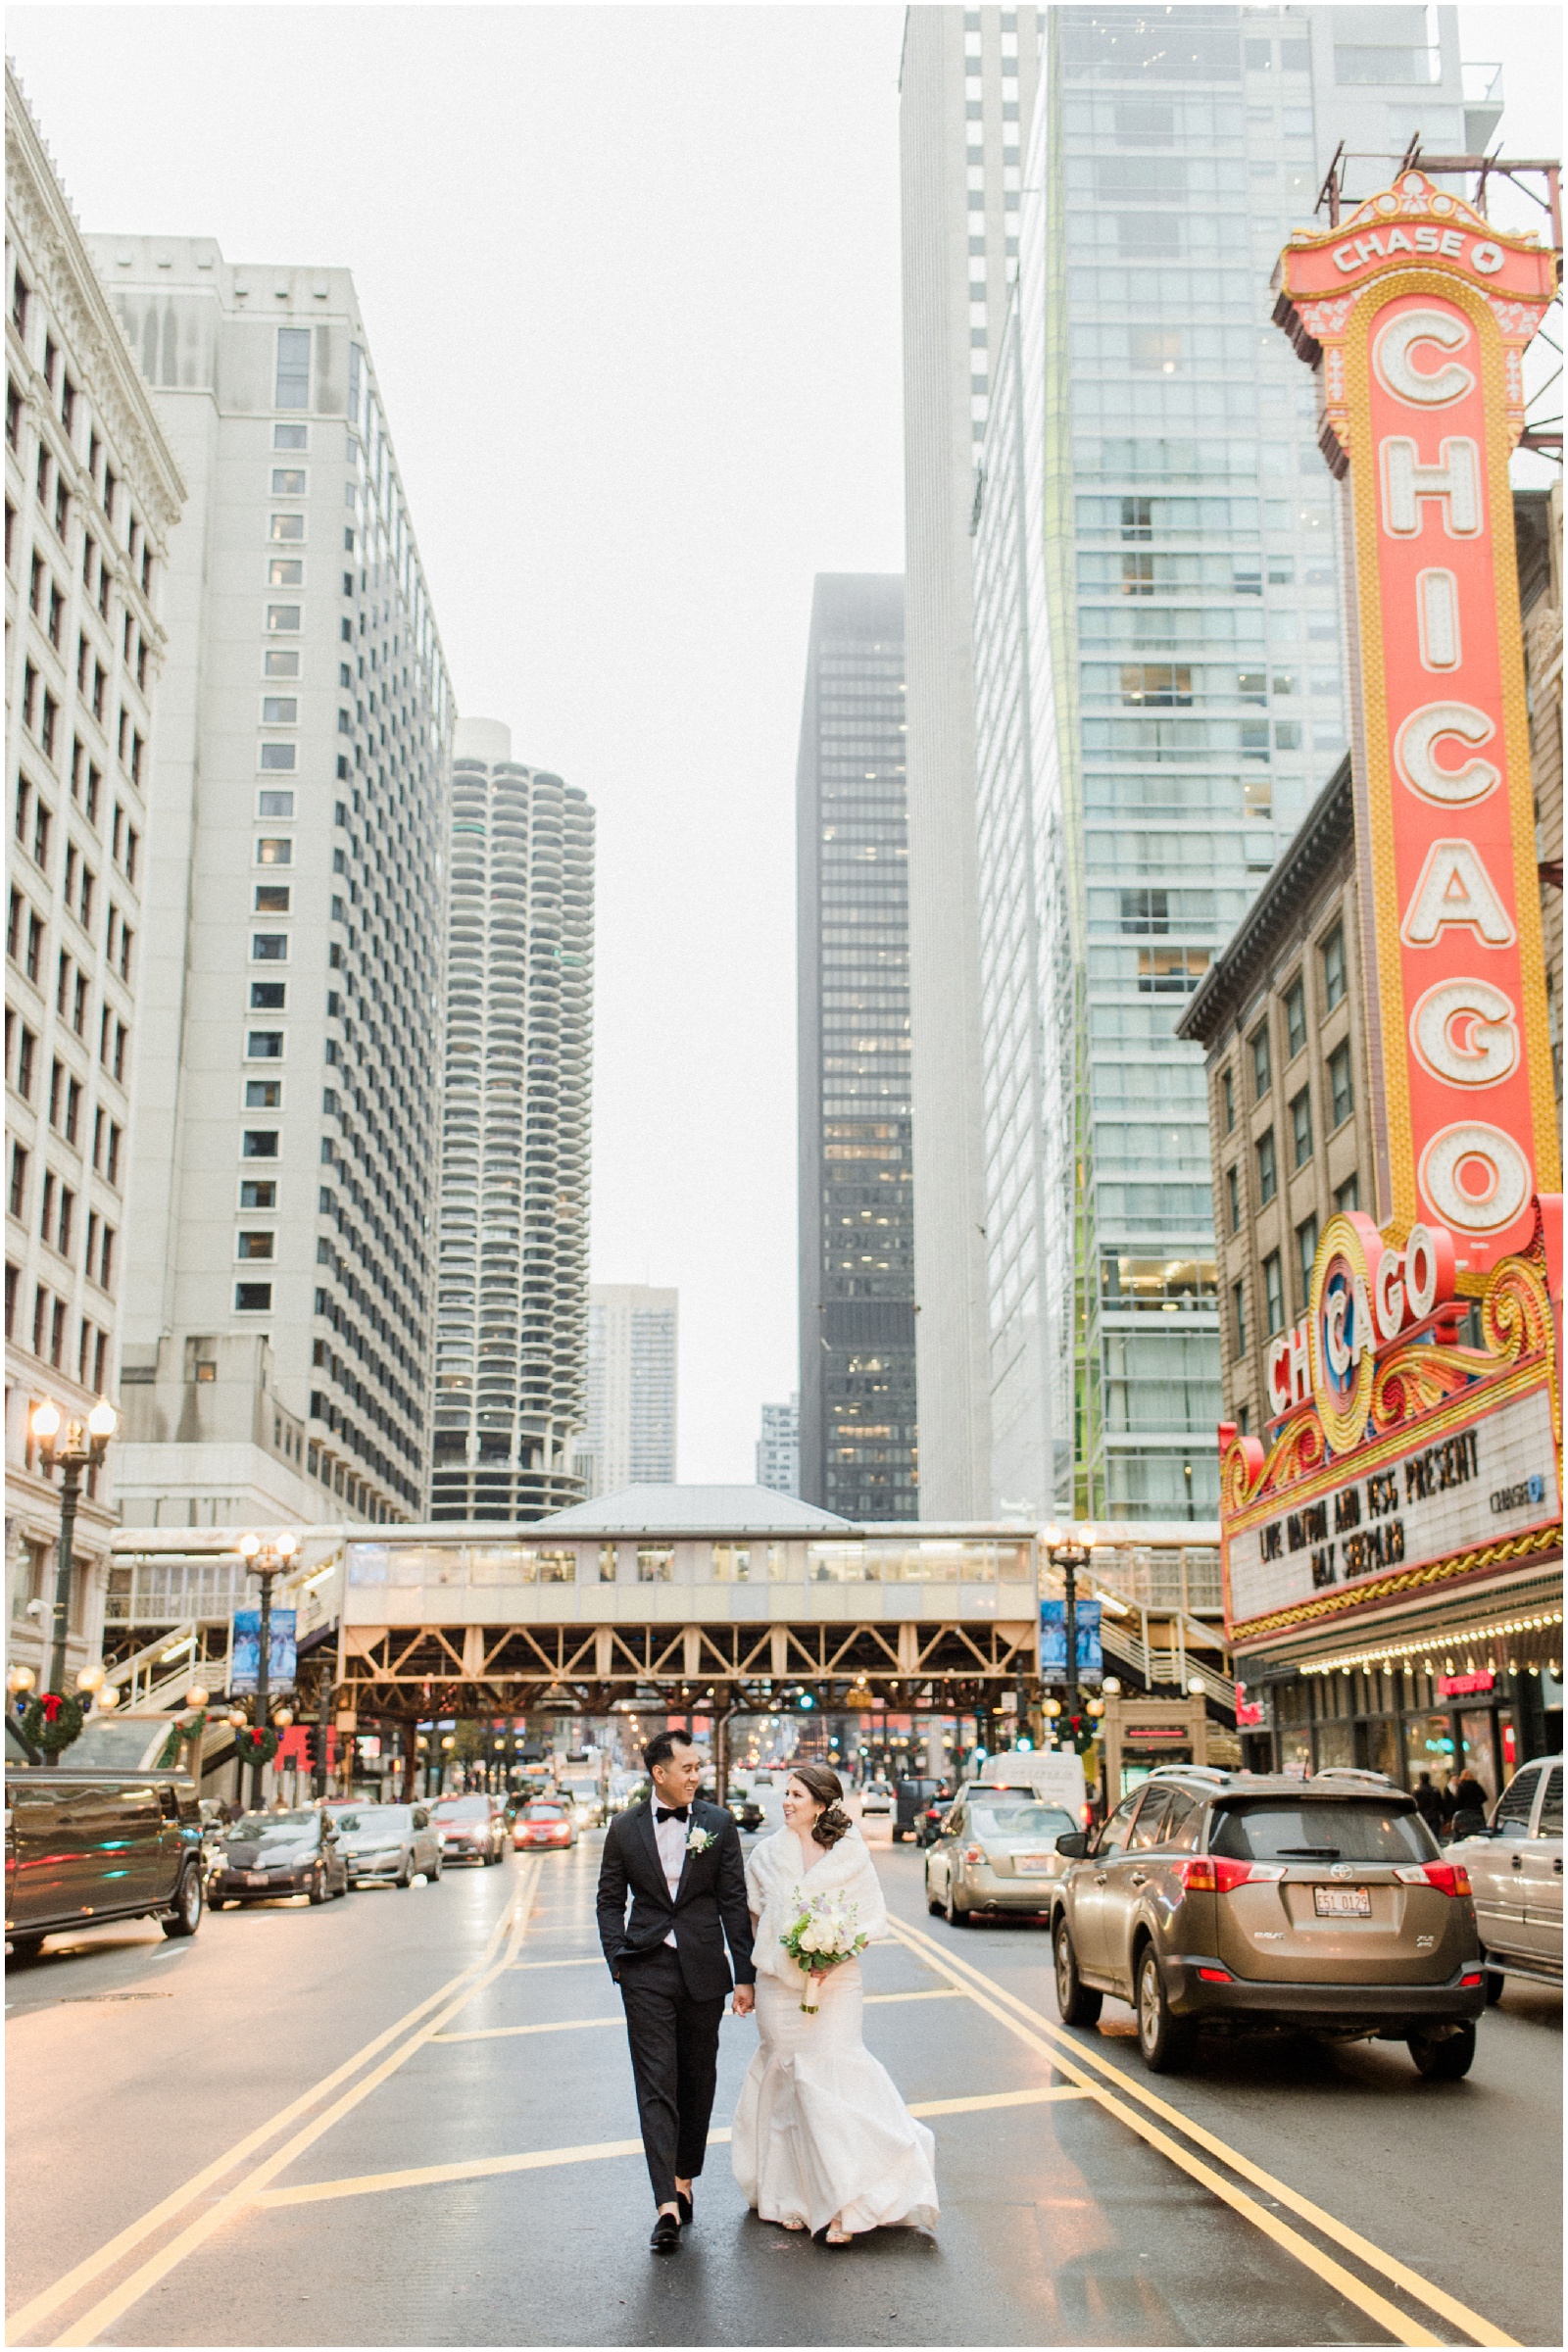 bride and groom walking in chicago street by chicago theatre